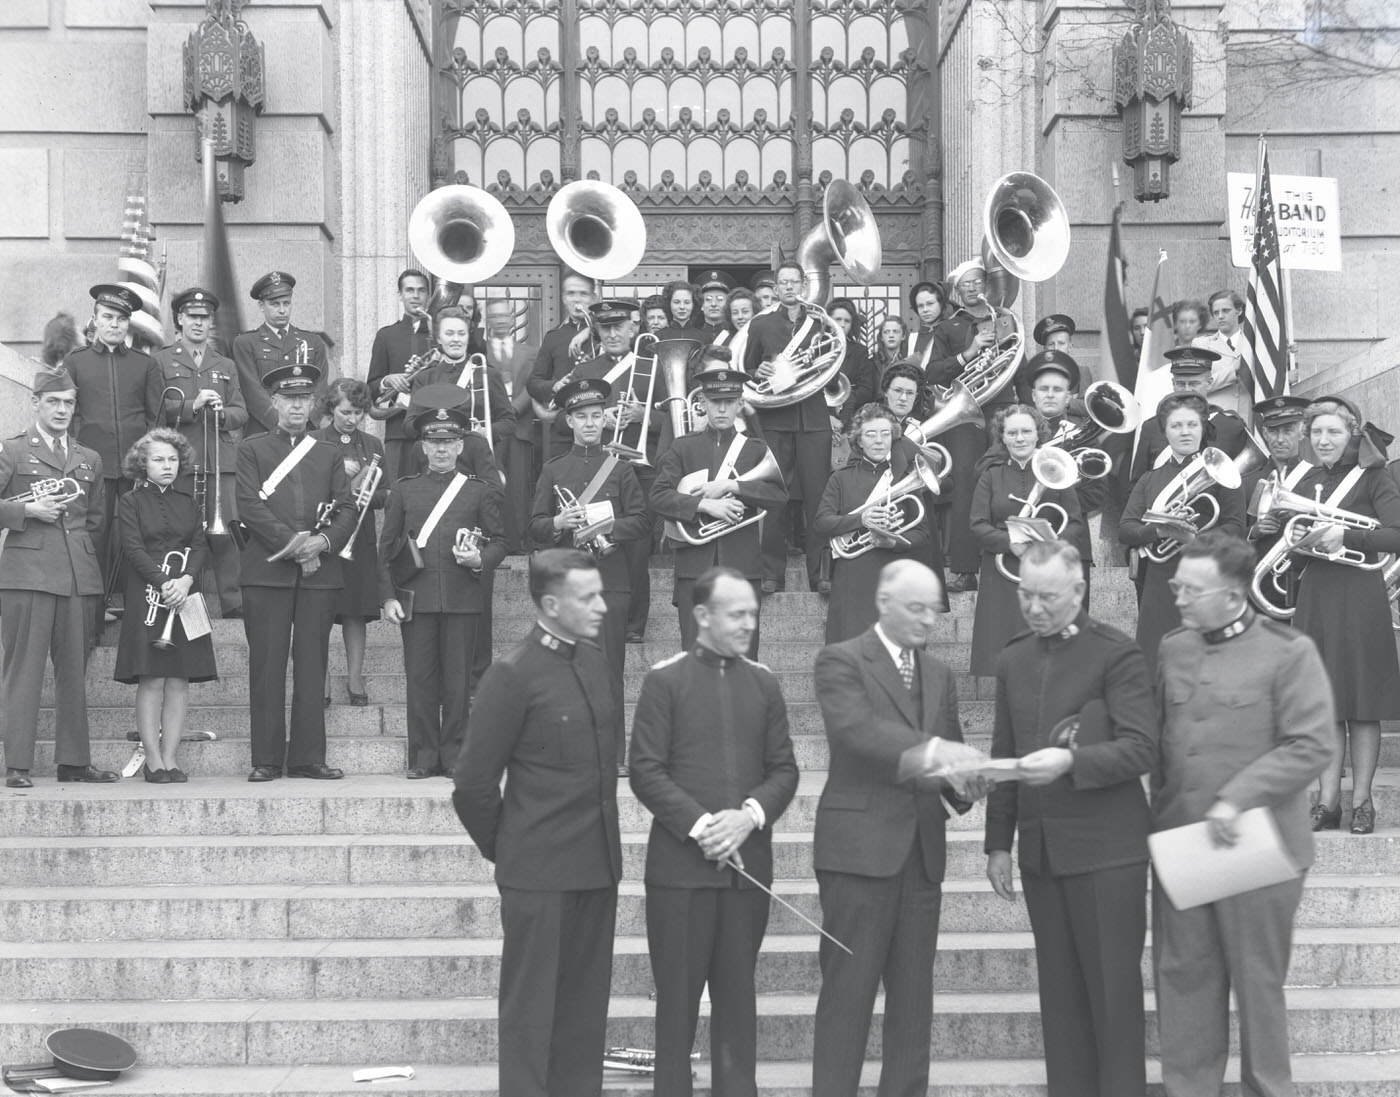 Salvation Army Band on Steps, 1945